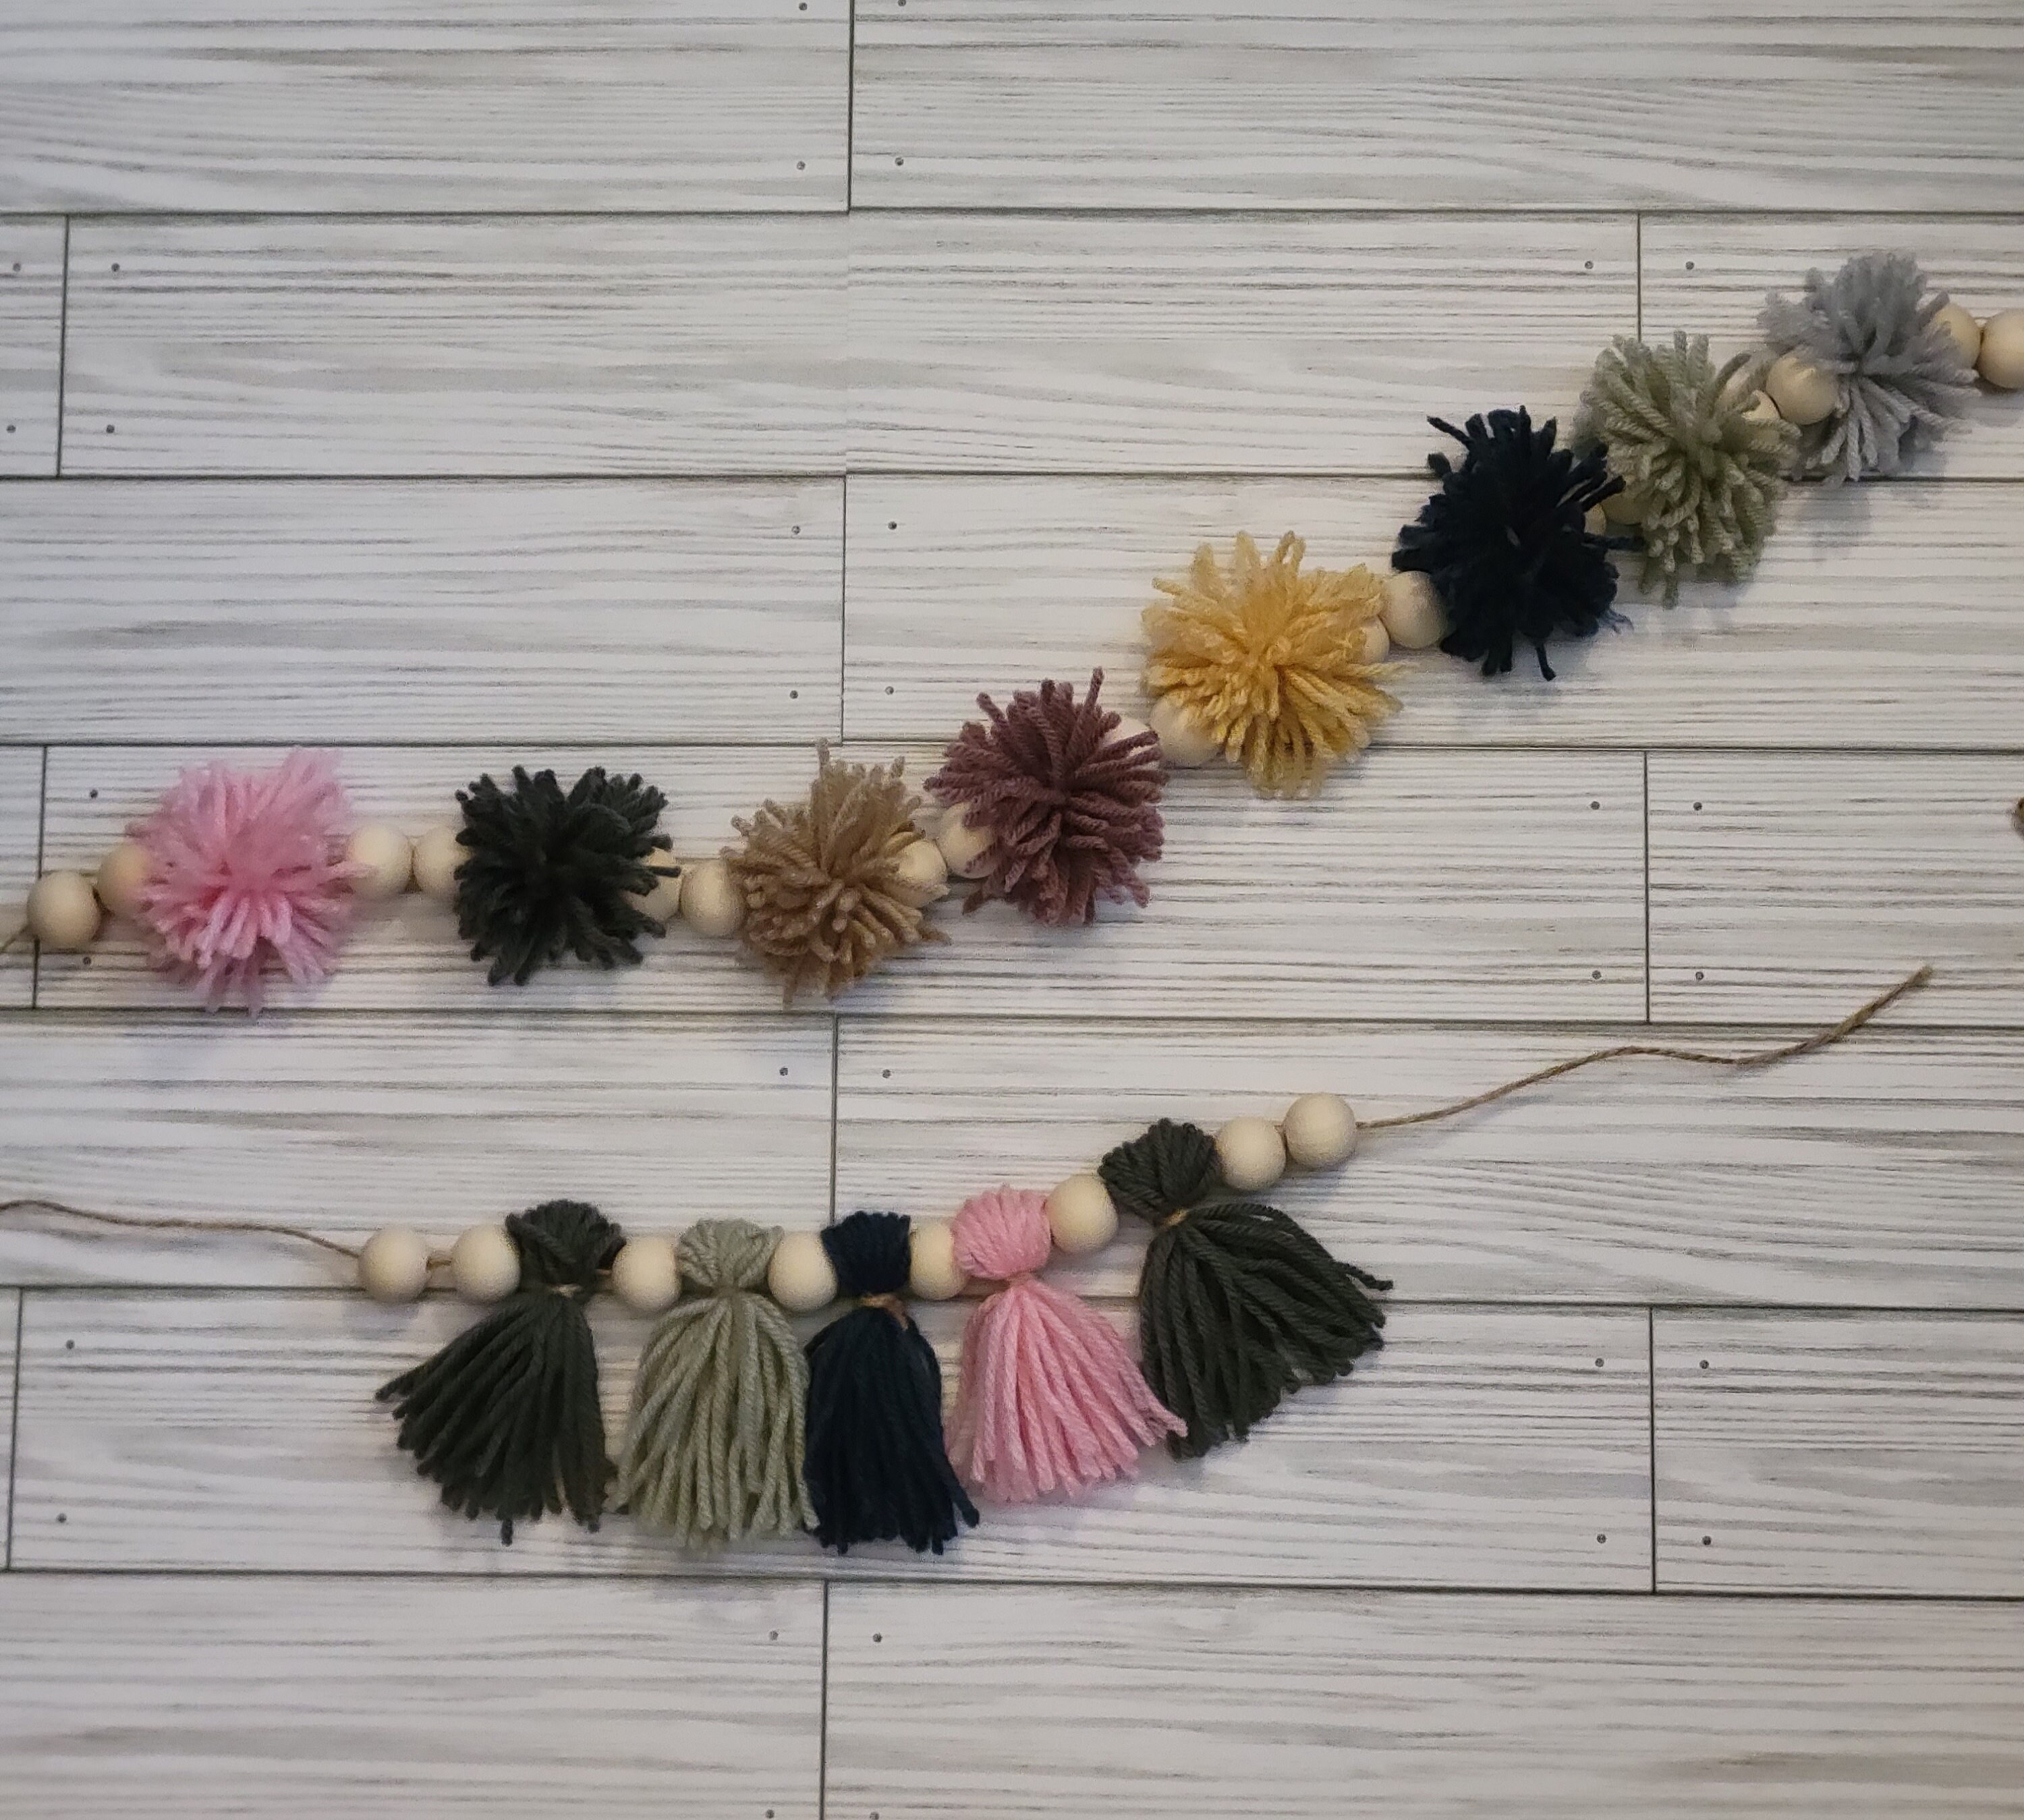 Tassel Garland Tassel Wall Hanging Decor Pastel Tassel Banner with Wood Beads and 2 Pieces Colorful Pom Pom Balls Garlands for School Classroom Baby